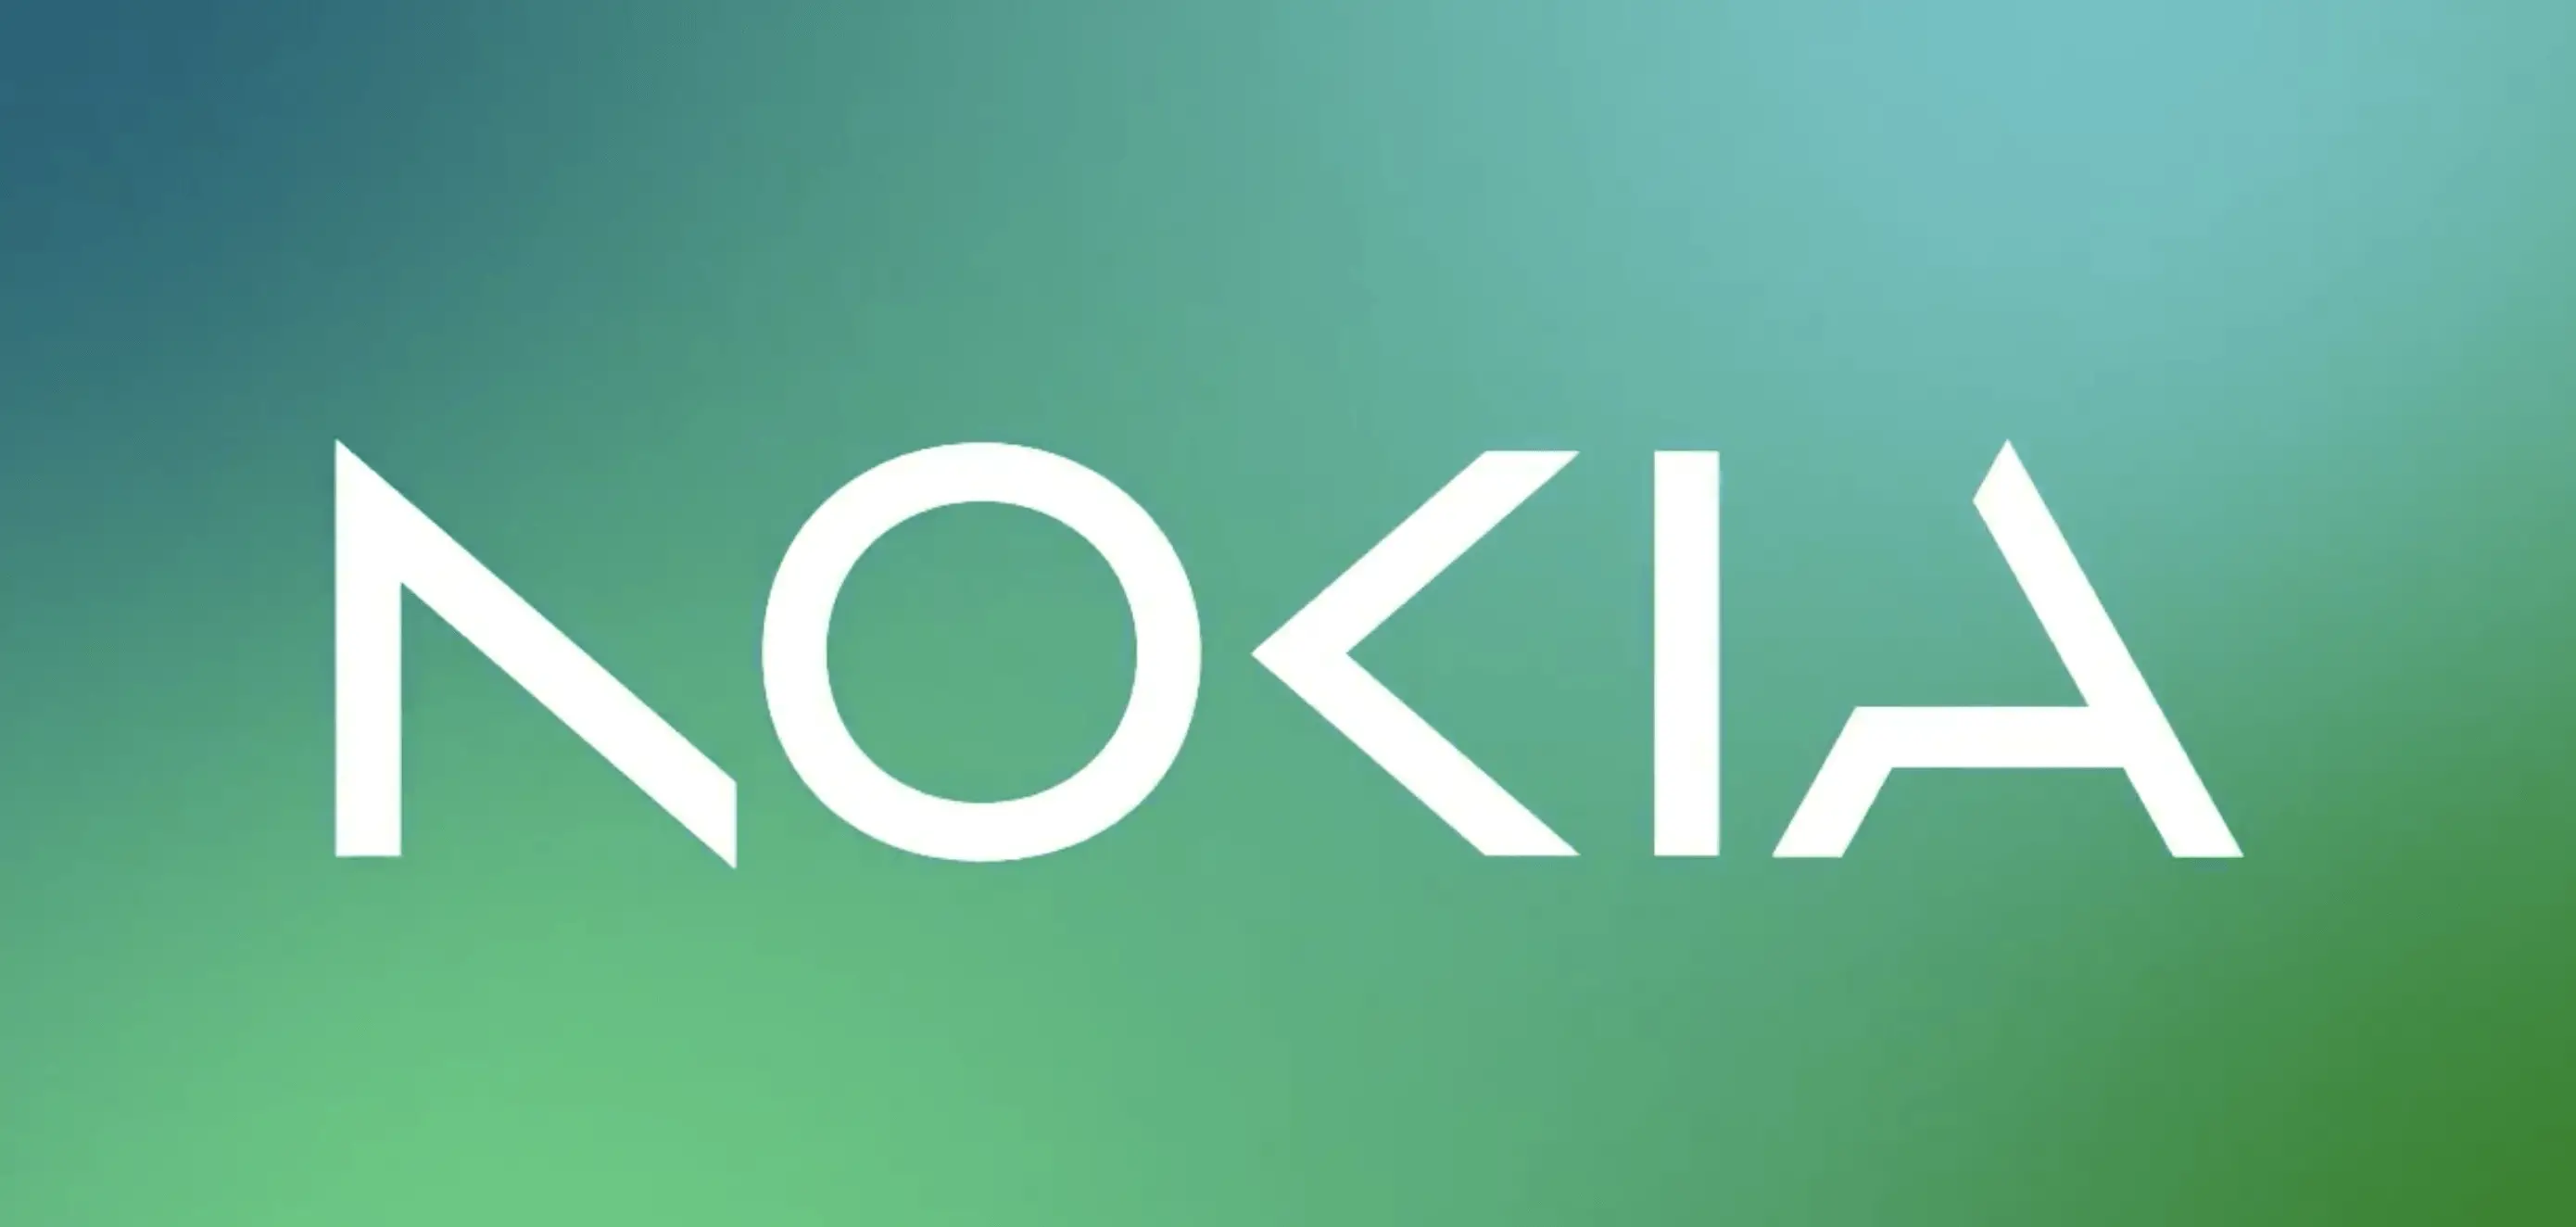 Nokia Begins to Shift its Focus Towards 6G Technologies